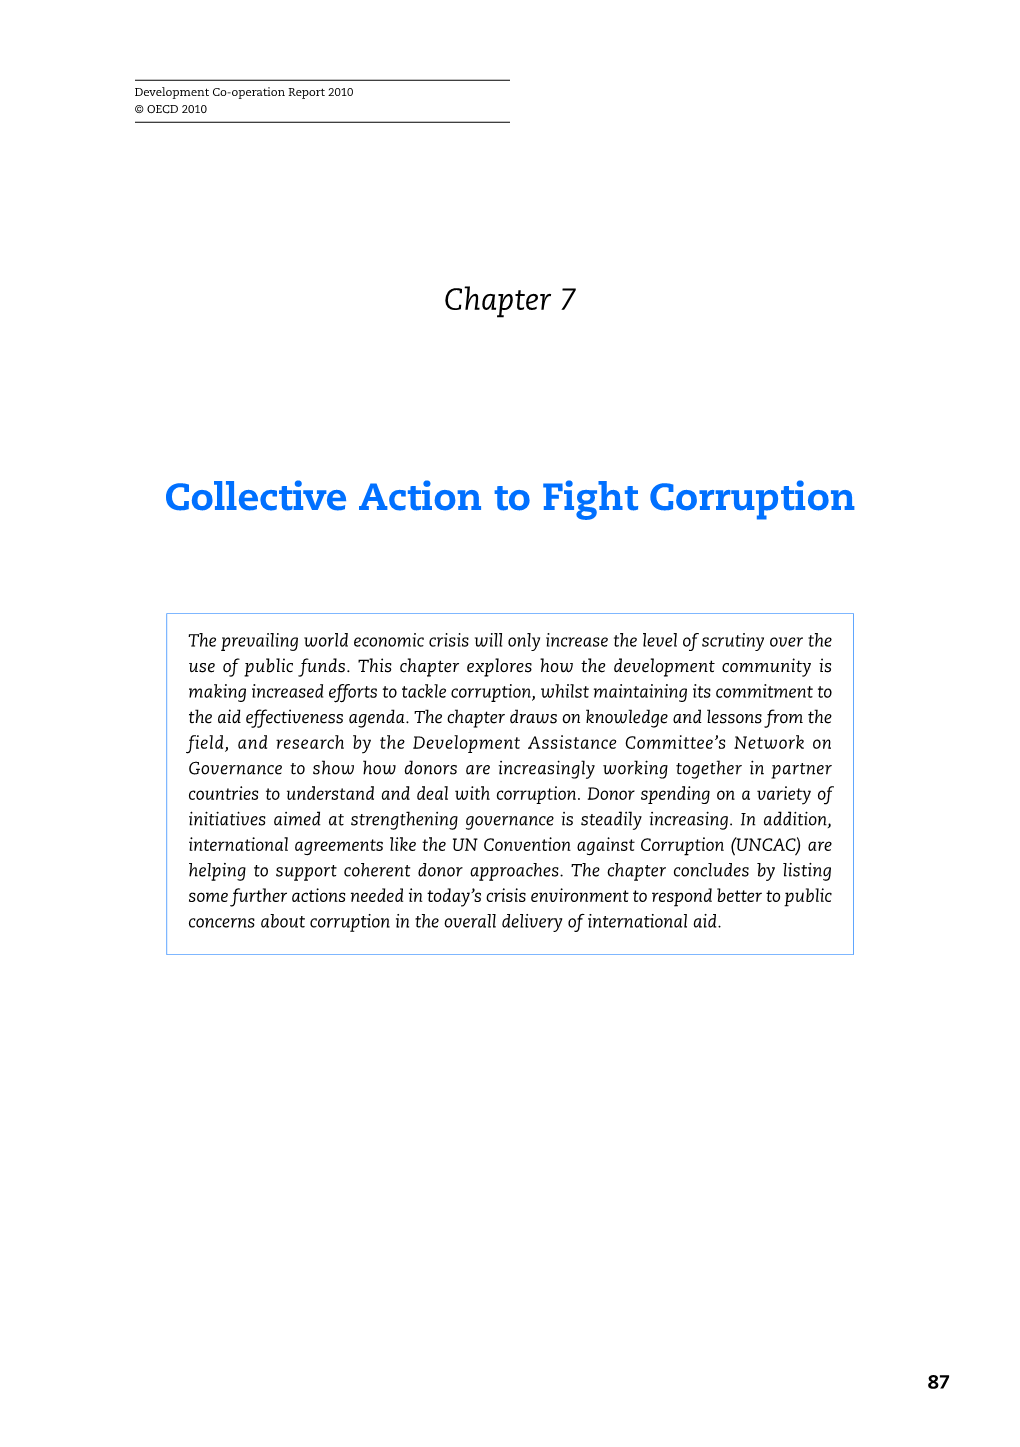 Collective Action to Fight Corruption